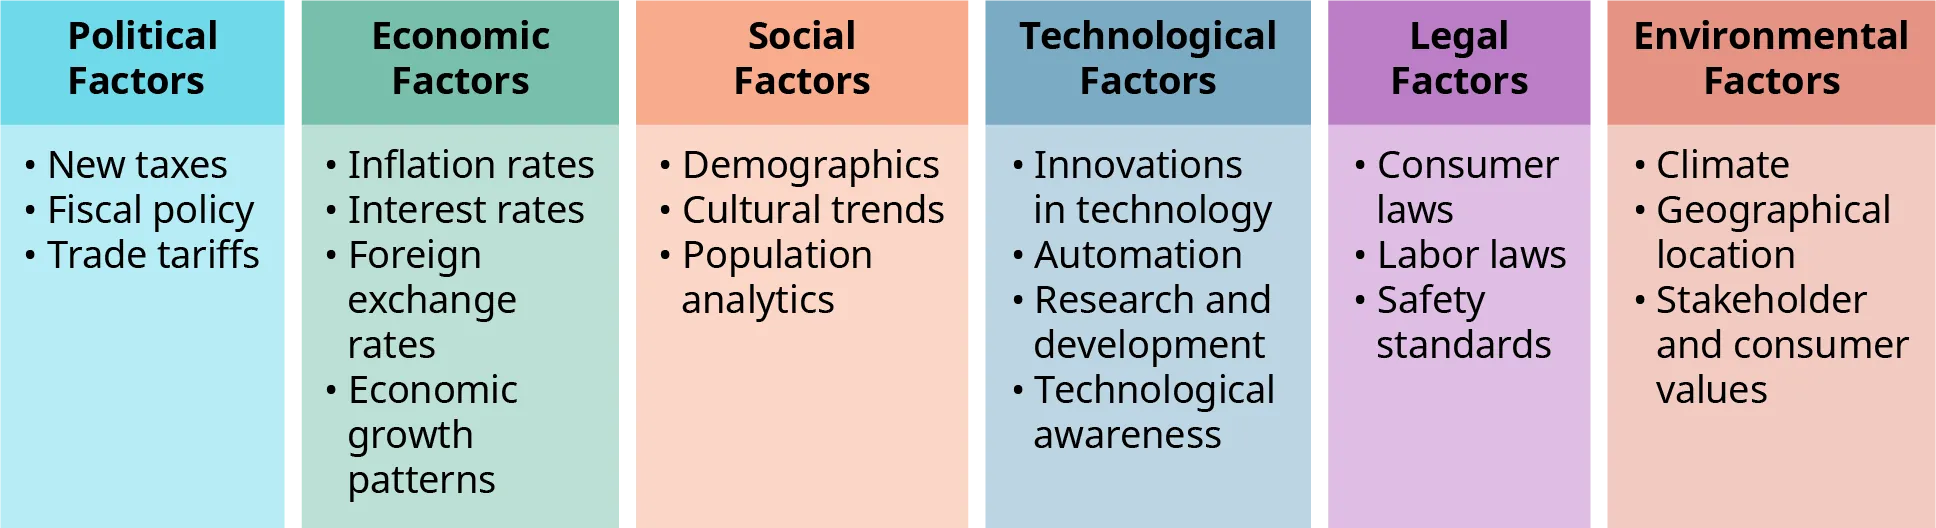 The components of the six PESTLE factors are shown in a chart. Political factors include new taxes, fiscal policy, and trade tariffs. Economic factors include inflation rates, interest rates, foreign exchange rates, and economic growth patterns. Social factors include demographics, cultural trends, and population analytics. Technological factors include innovations in technology, automation, research and development, and technological awareness. Legal factors include consumer laws, labor laws, and safety standards. Environmental factors include climate, geographical location, and consumer values.